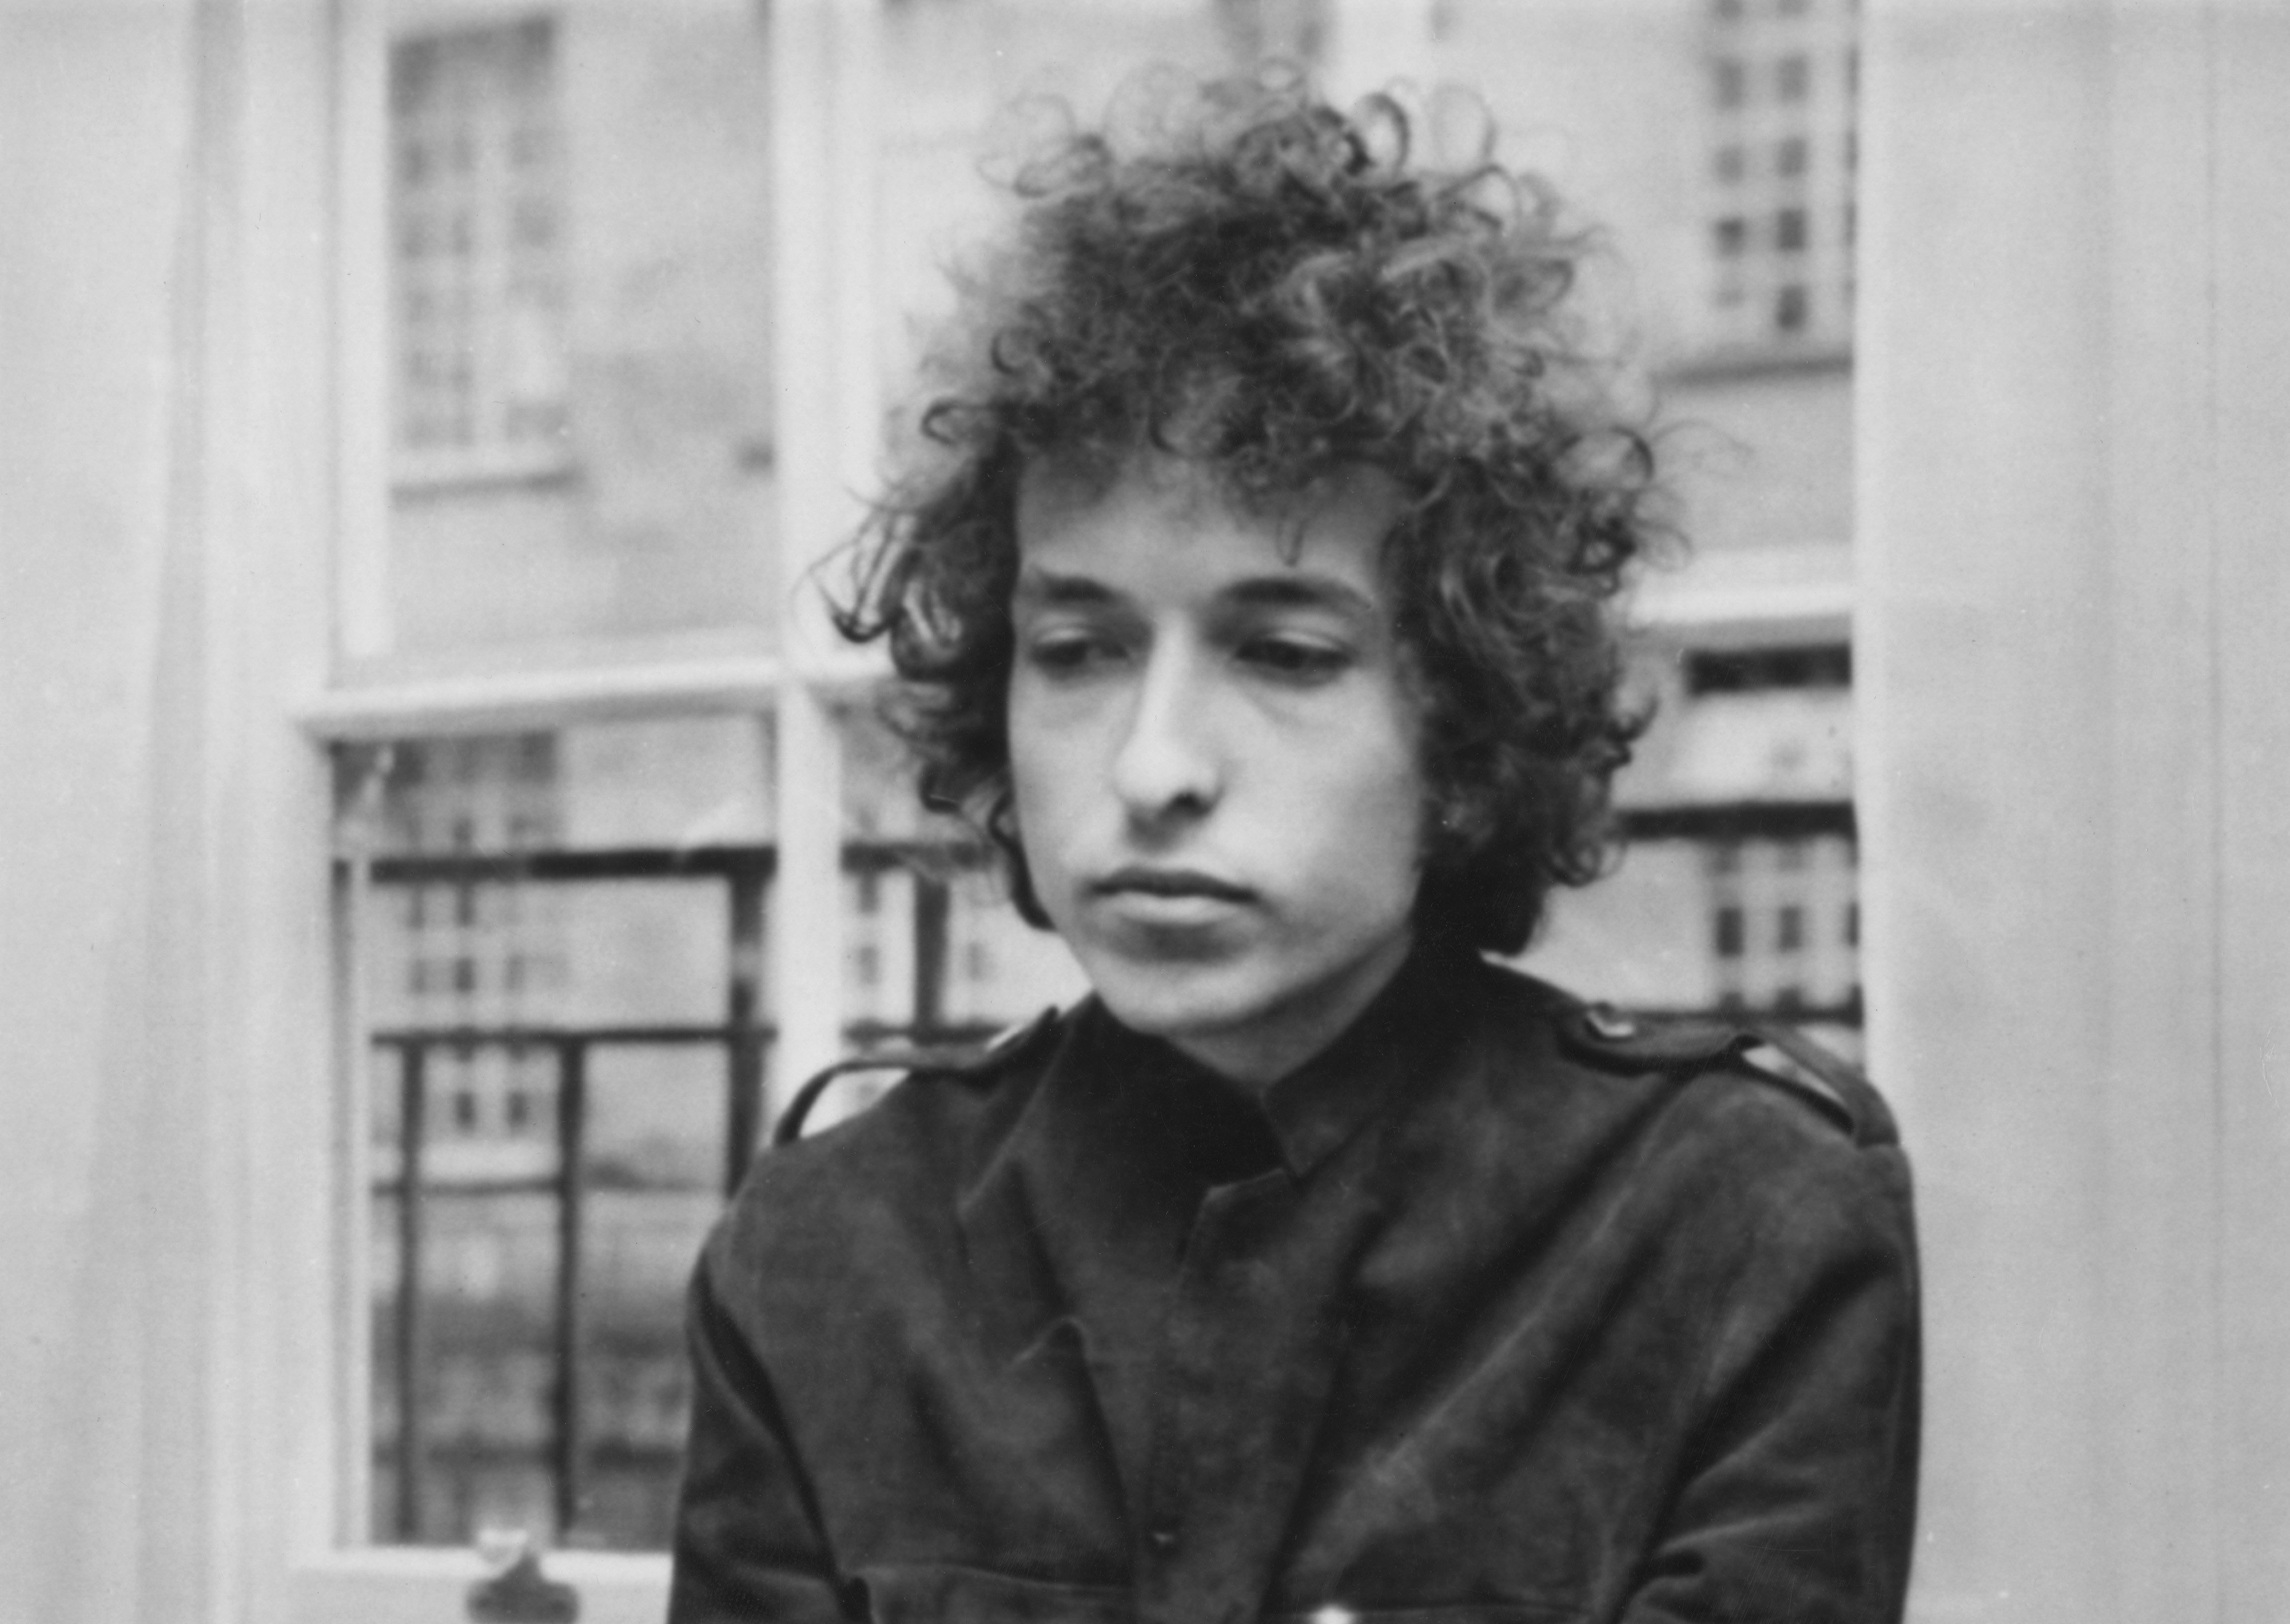 Why Some Believe Bob Dylan Lied in His Memoir and Interviews: ‘A Pack of Lies’